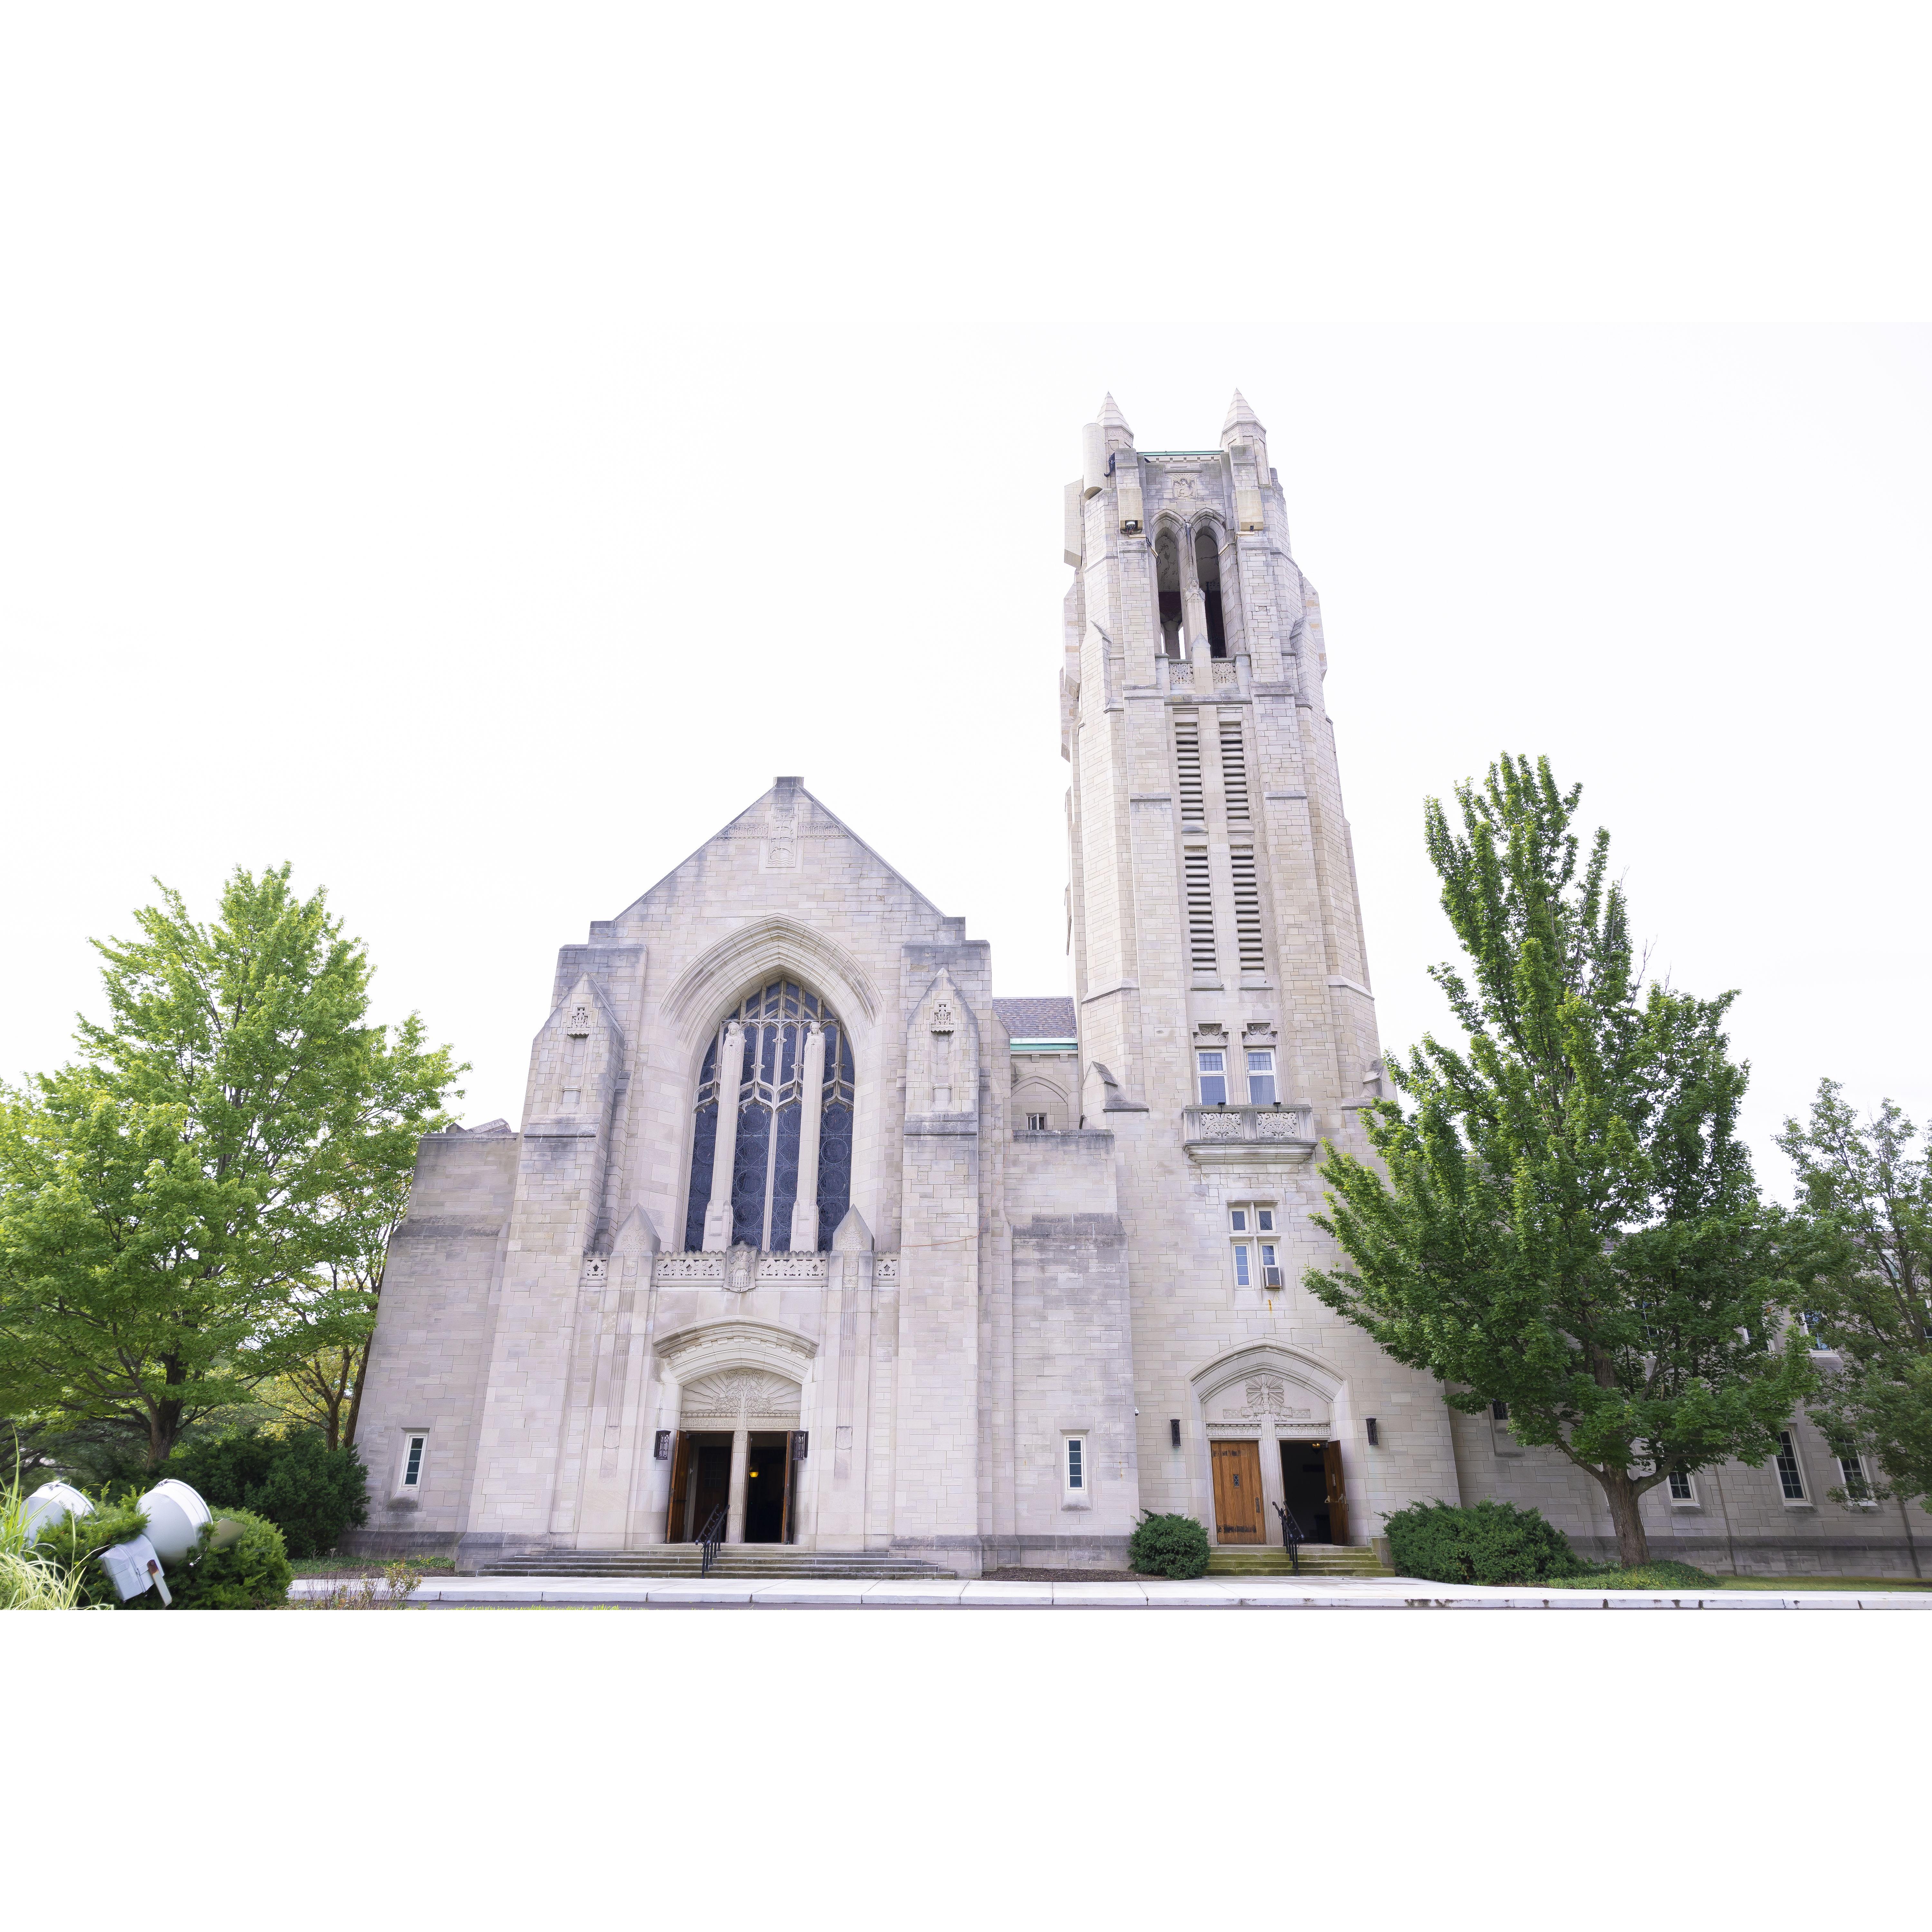 The First Baptist Church where we got married with the bless!
婚礼教堂外部景观